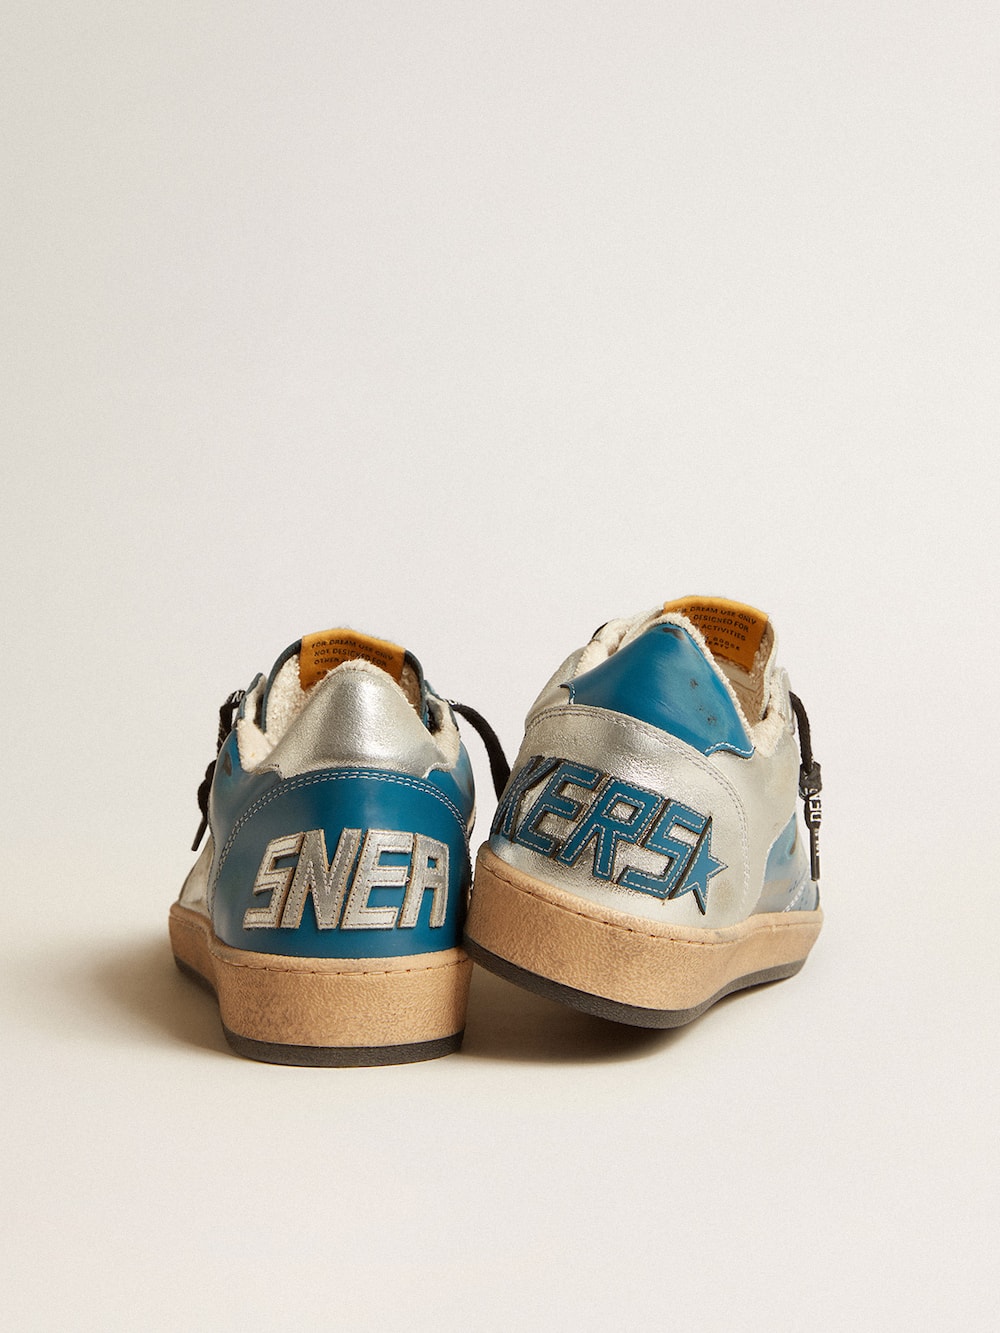 Golden Goose - Ball Star LAB in glossy blue and silver leather with perforated star in 